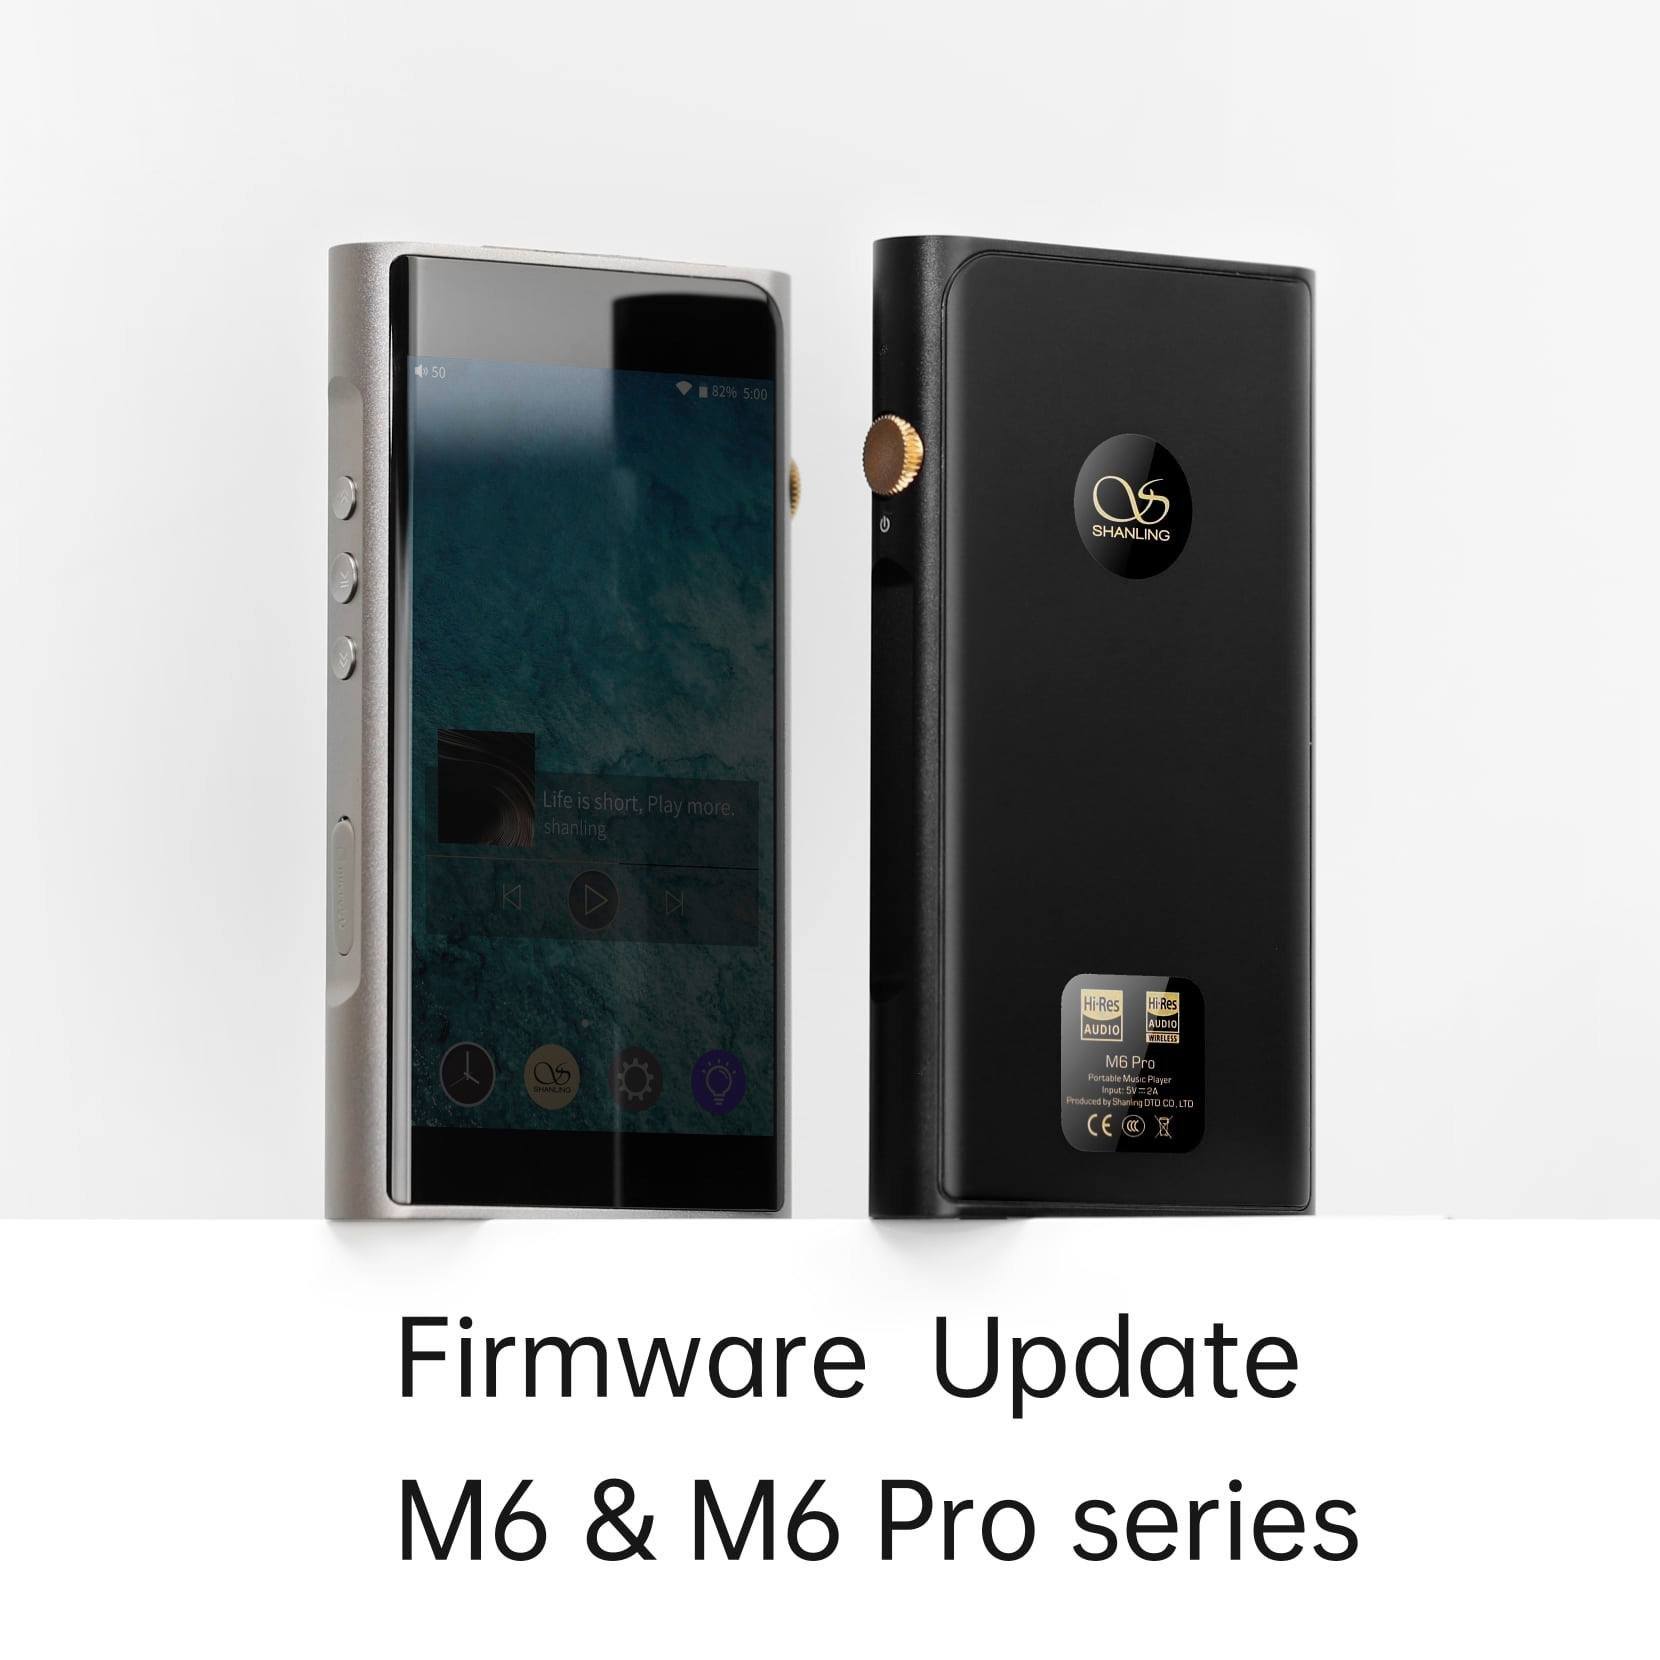 Shanling M6/M6 Pro Series of DAP's New Firmware Released